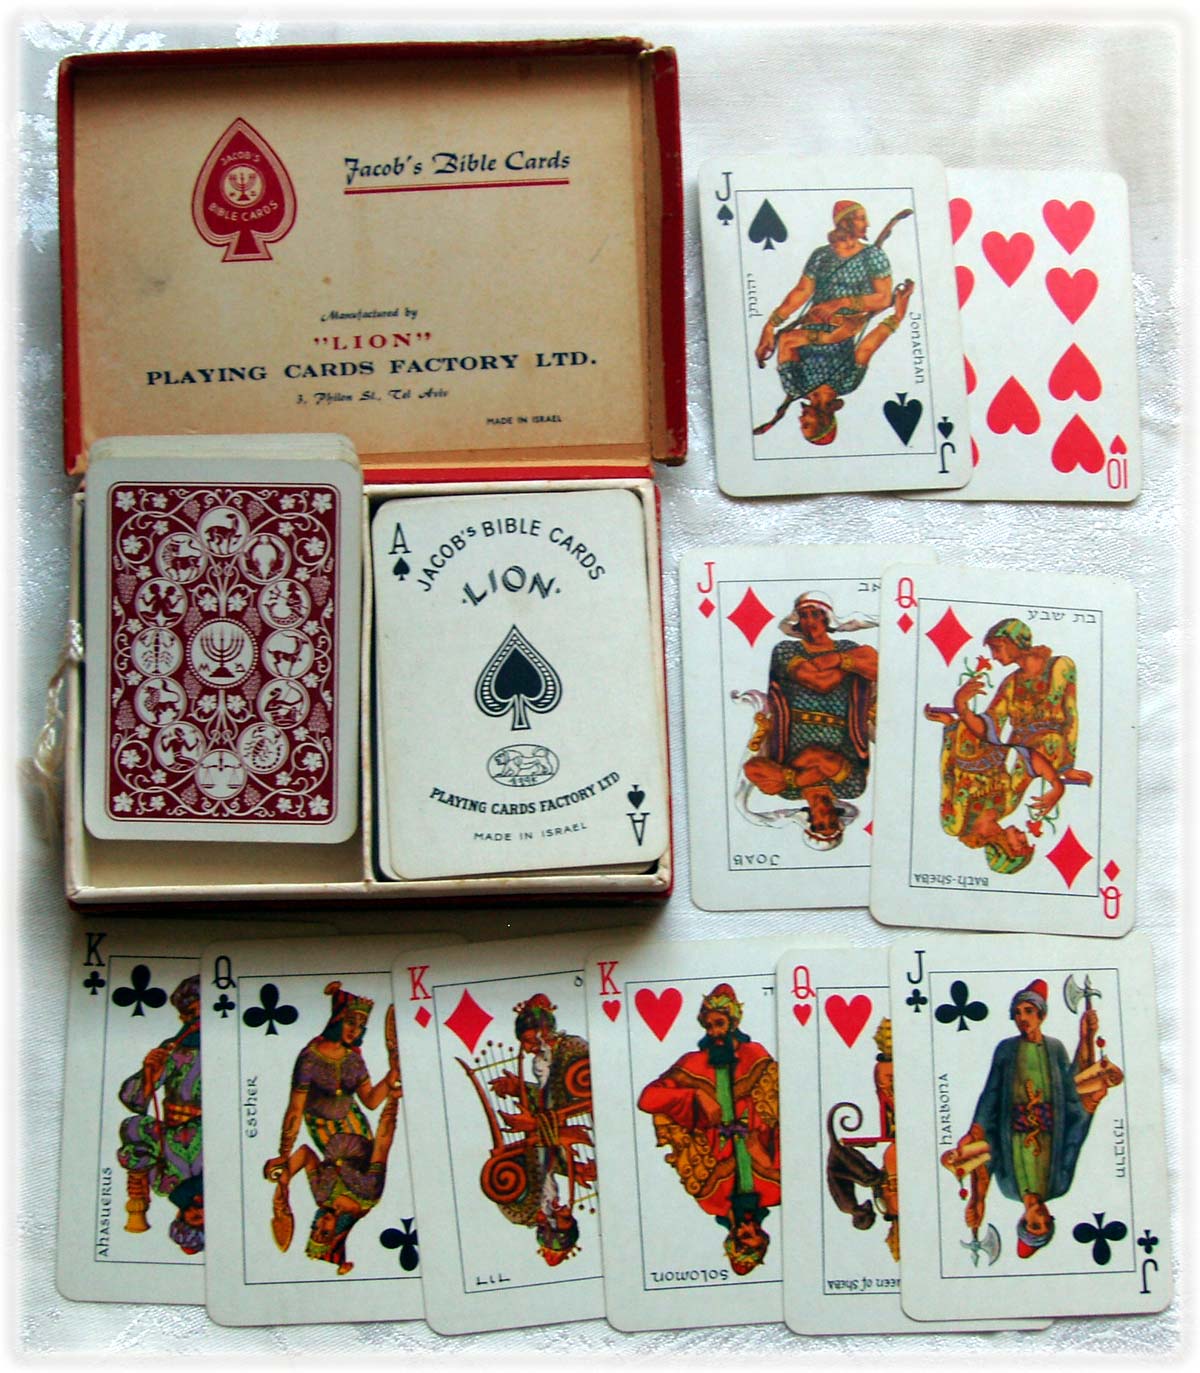 Jacob’s Bible Cards published by Lion Playing Card Factory Ltd, Tel Aviv, 1980s